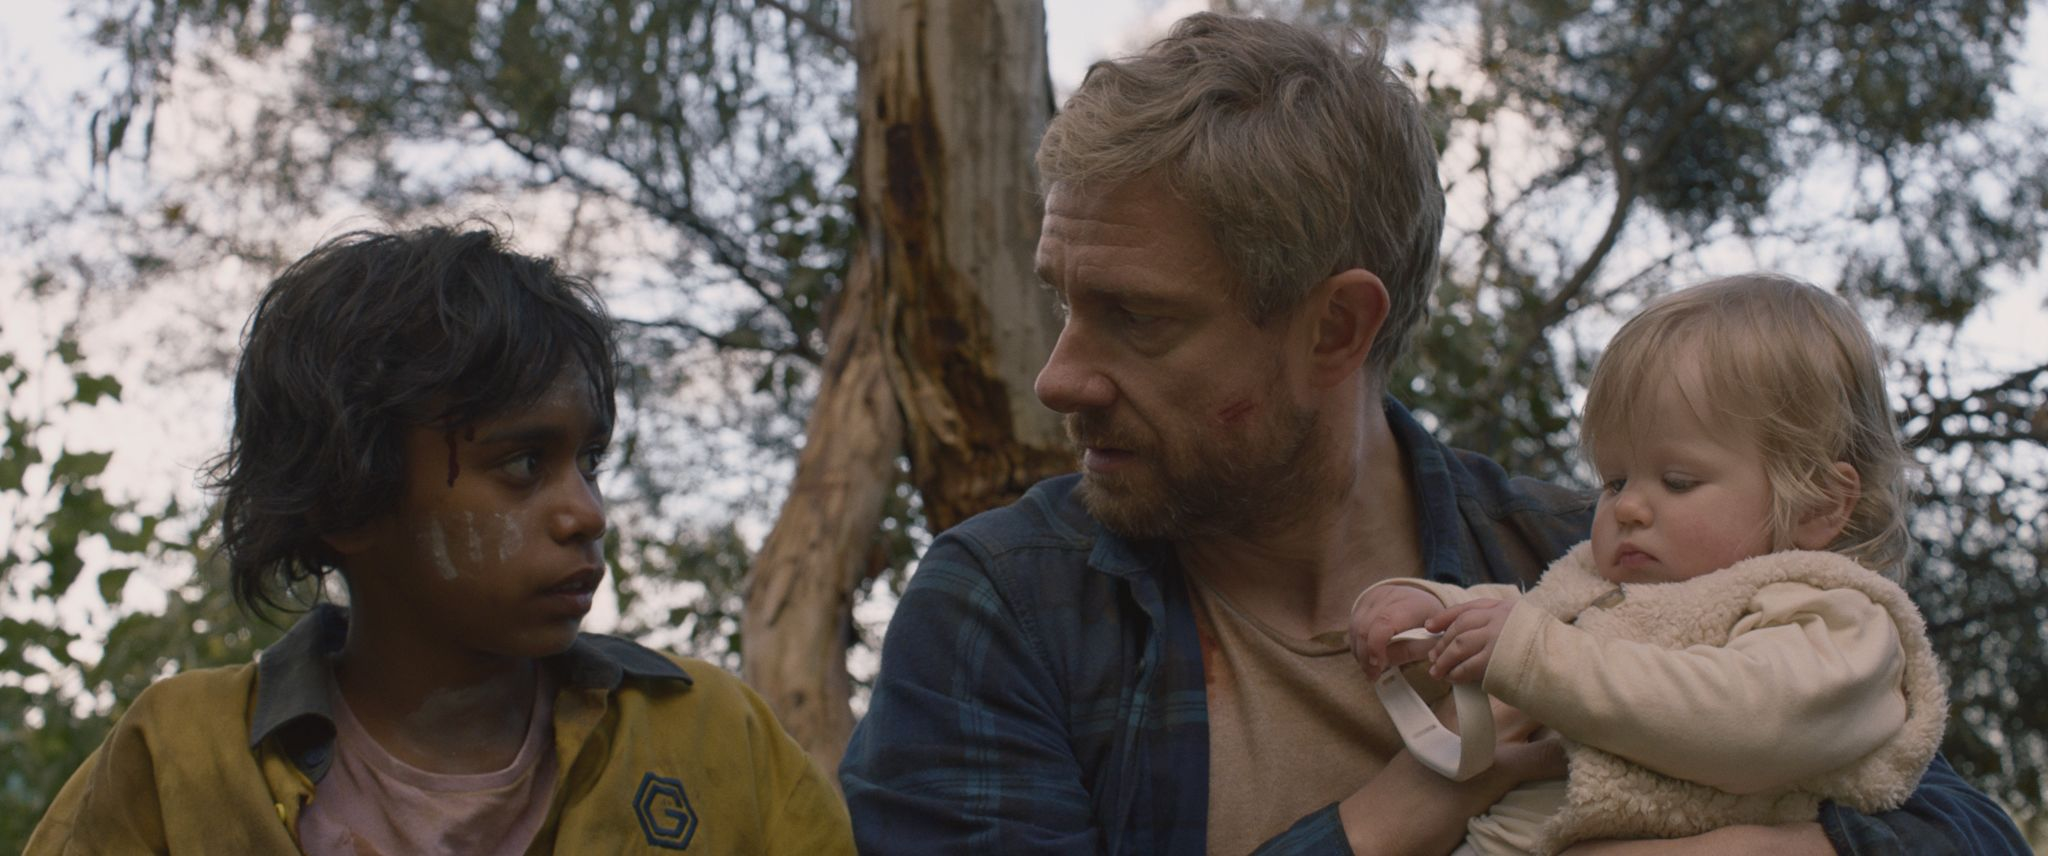 CARGO [Movie Review]: Zombies Are the Windows to the Soul.